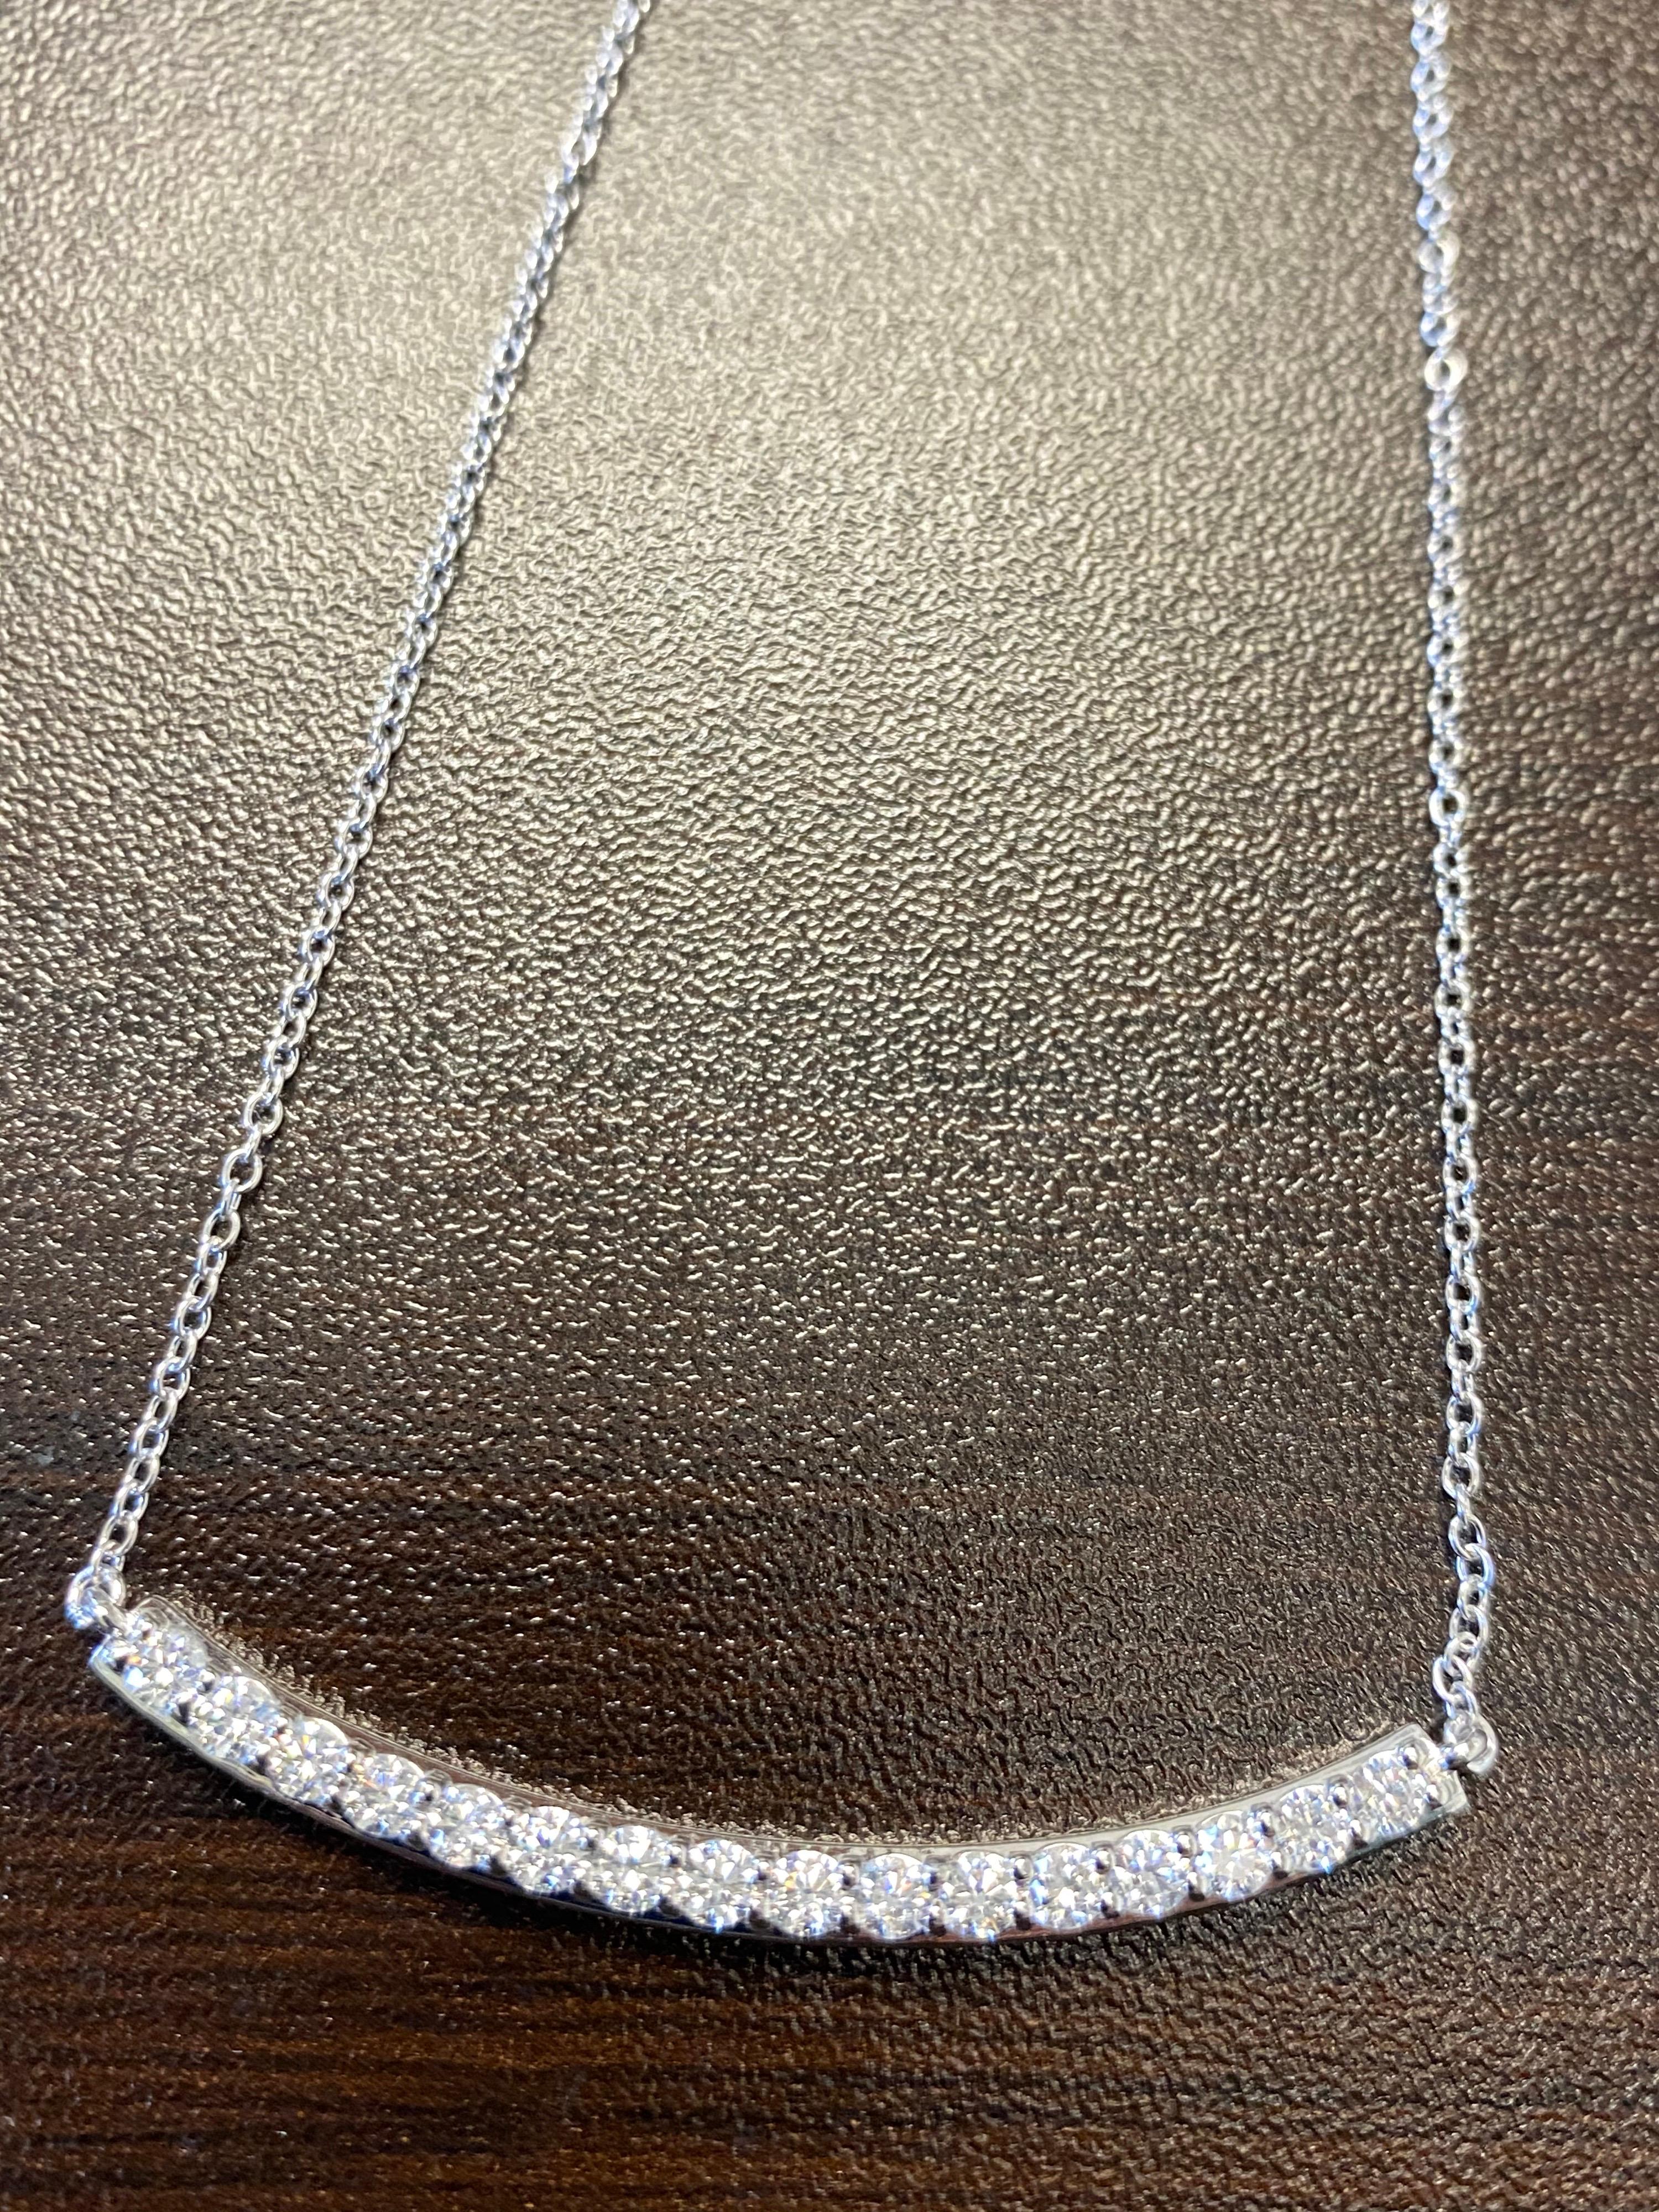 14 Karat White Bar Diamond Pendant 7 Pointers In New Condition For Sale In Great Neck, NY